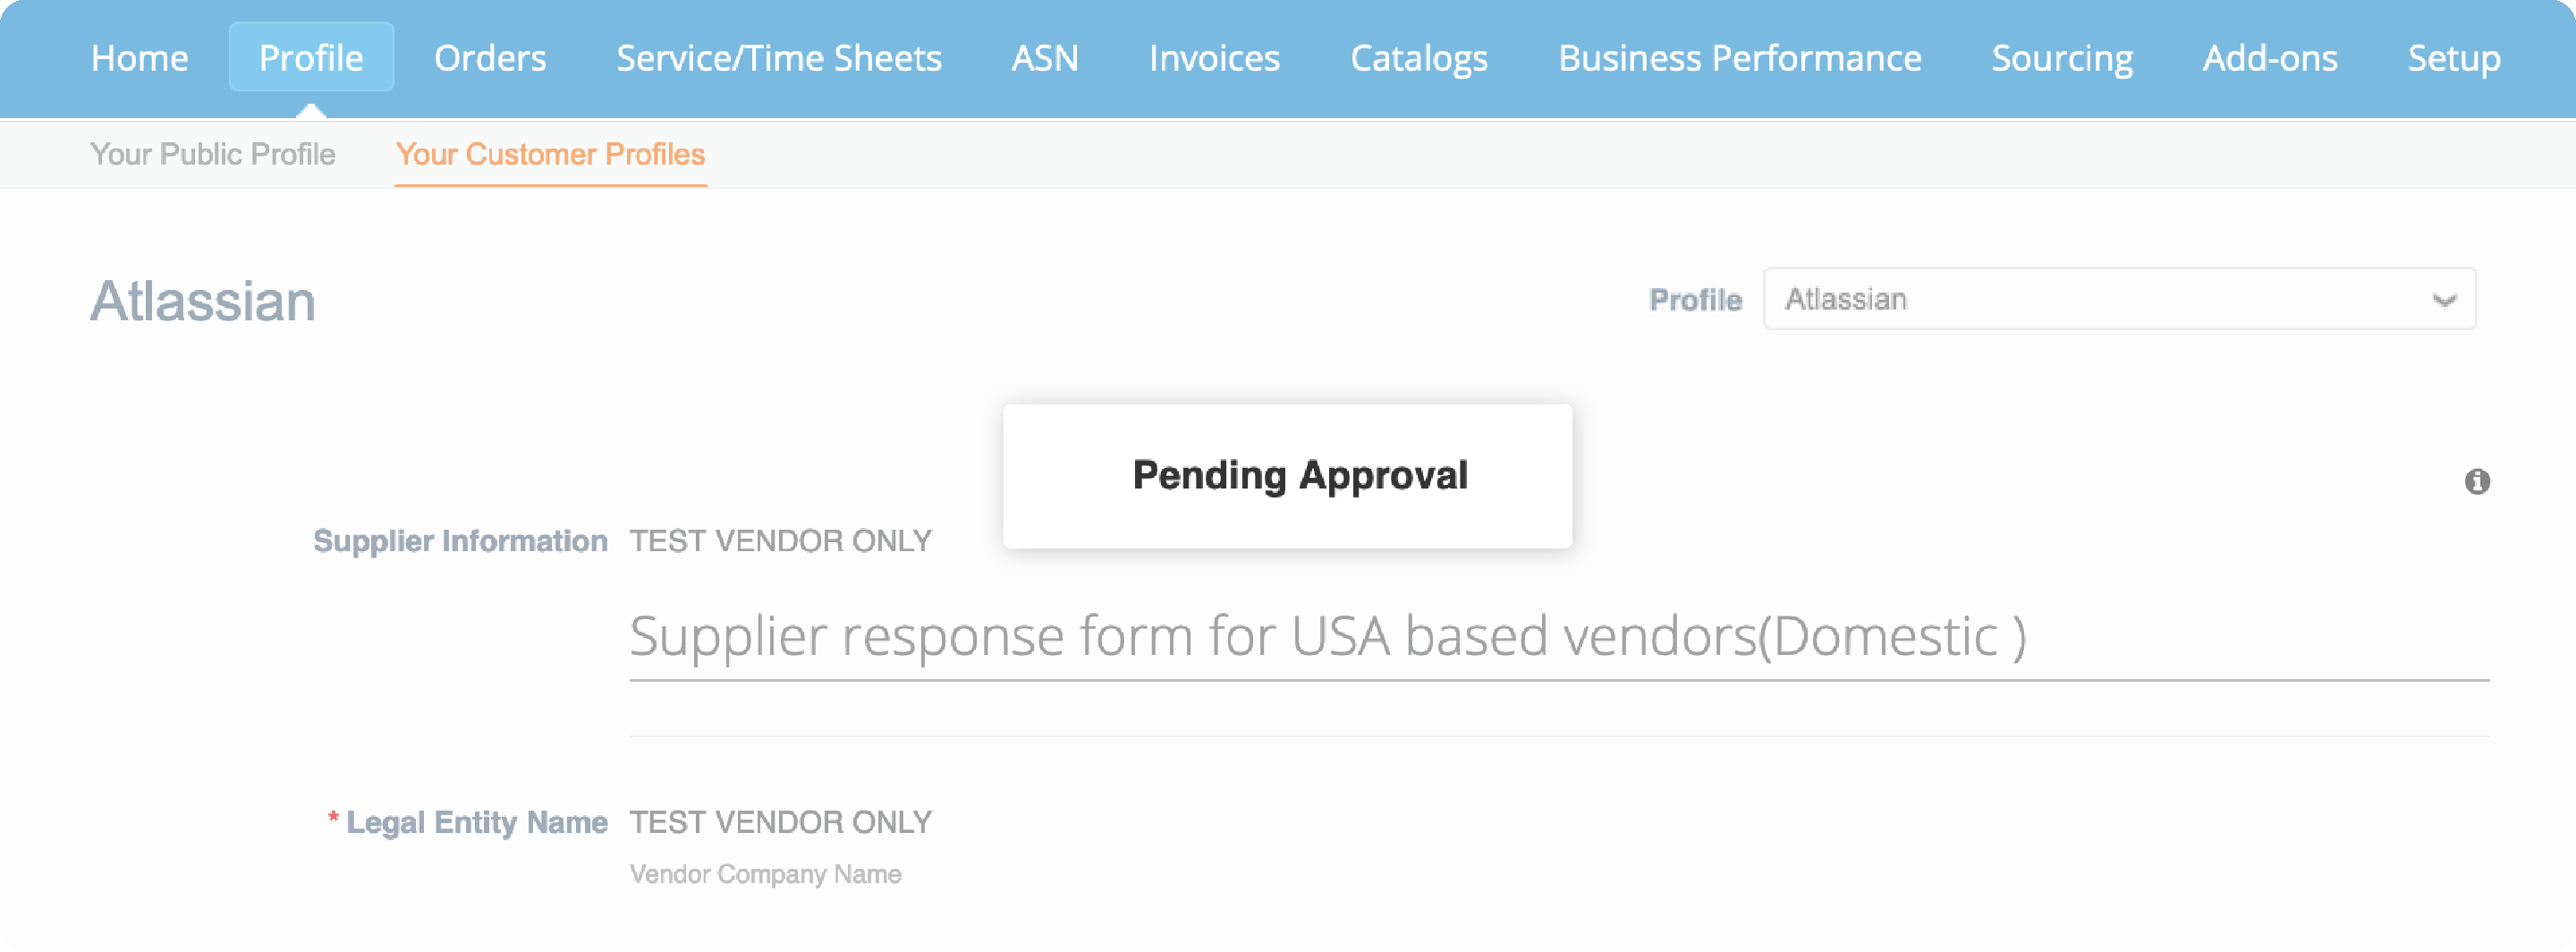 Pending Approval status on your customer profile Coupa Supplier